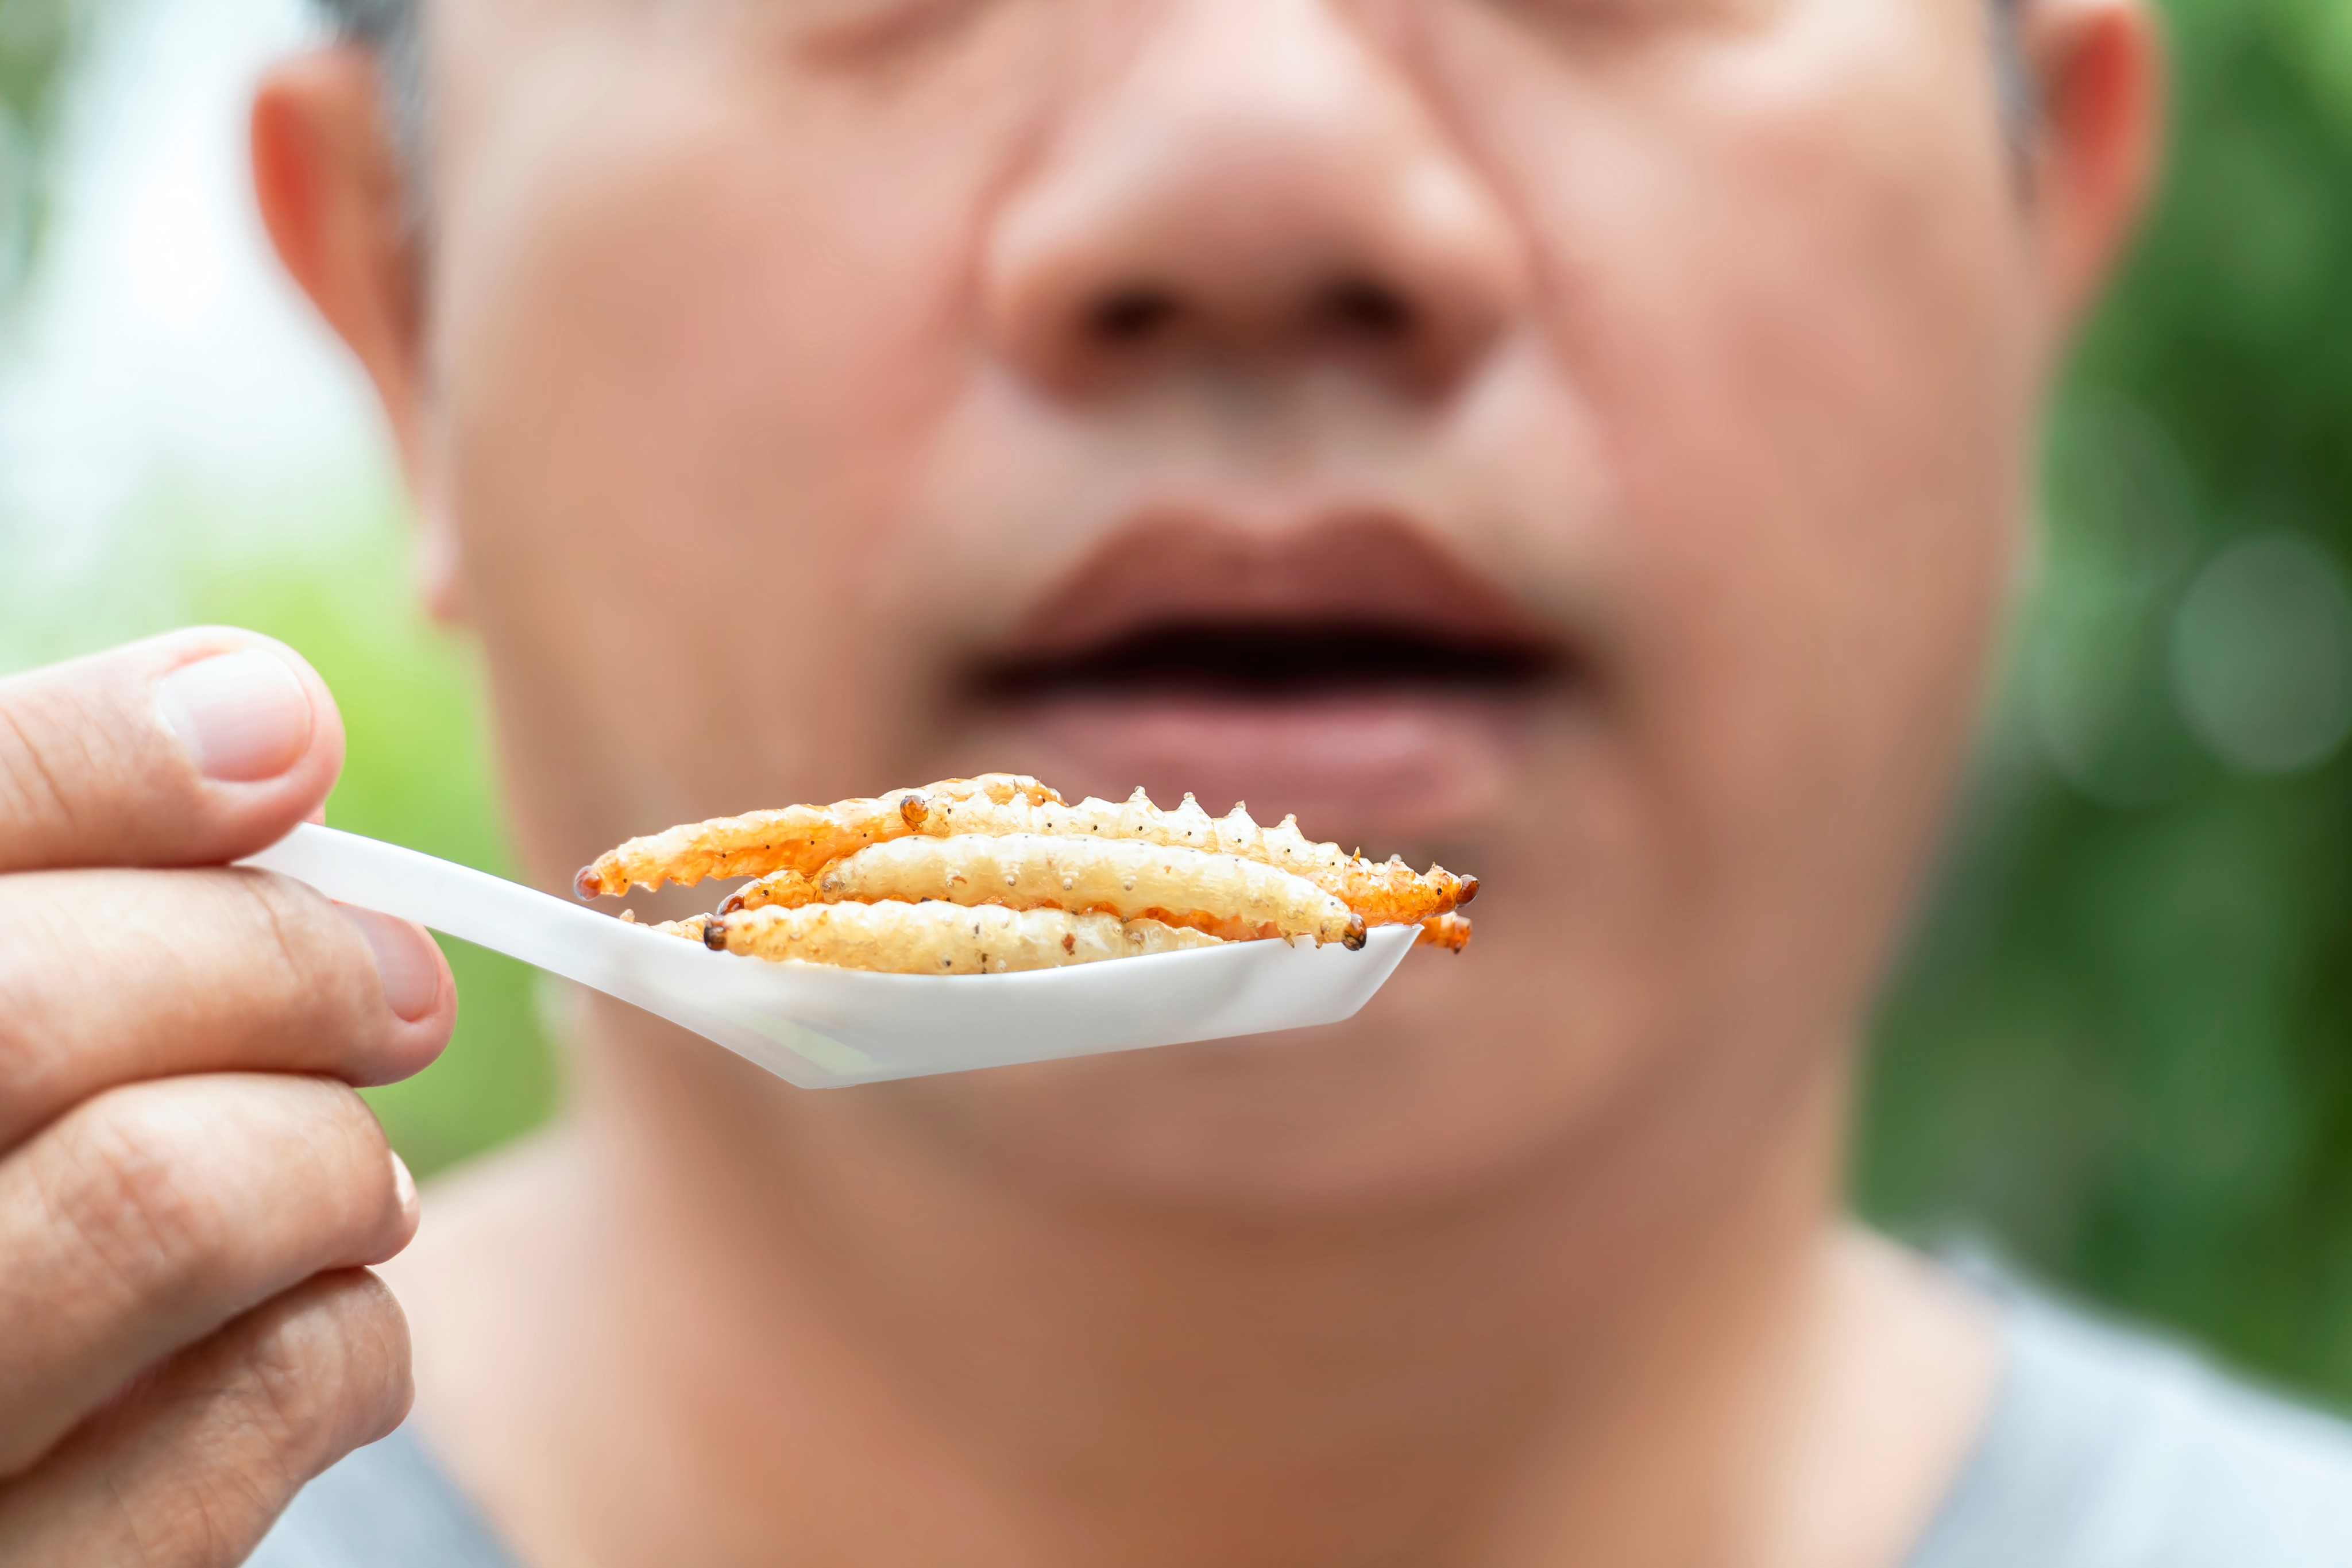 A man holds a spoon full of bamboo worms, thought to be a good source of protein. Photo: Shutterstock